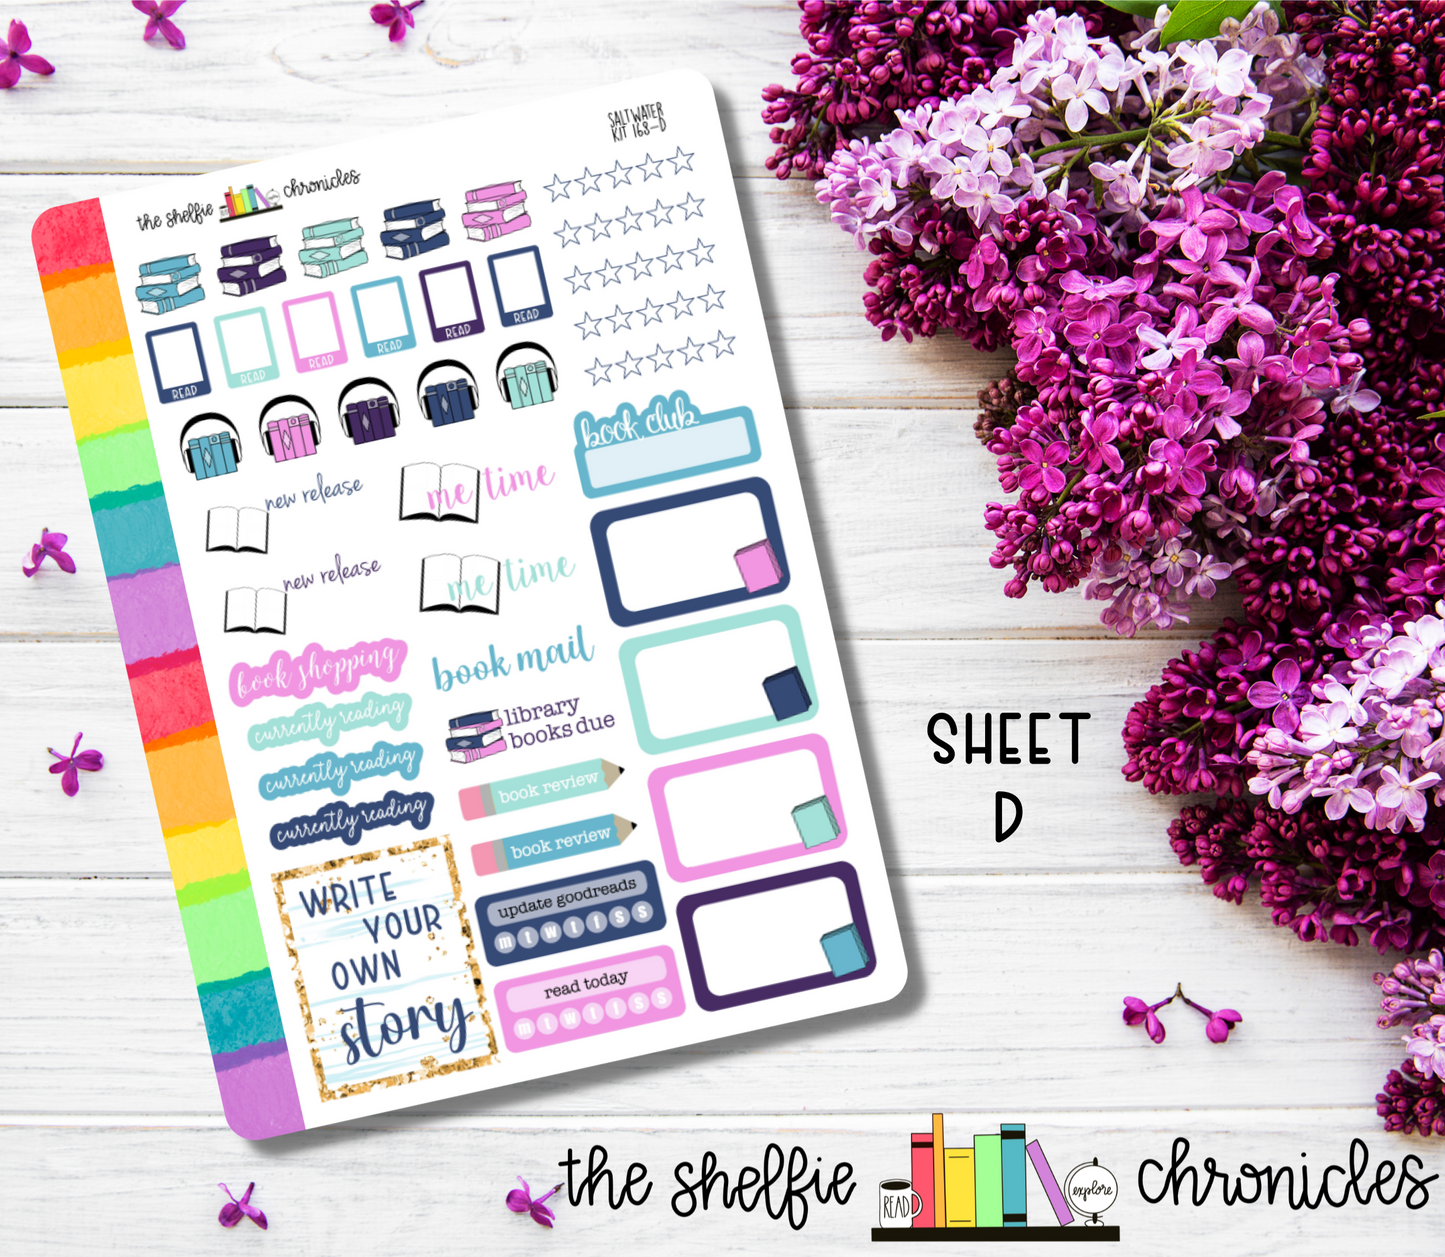 Kit 168 - Saltwater Weekly Kit - Die Cut Stickers - Repositionable Paper - Made To Fit 7x9 Planners